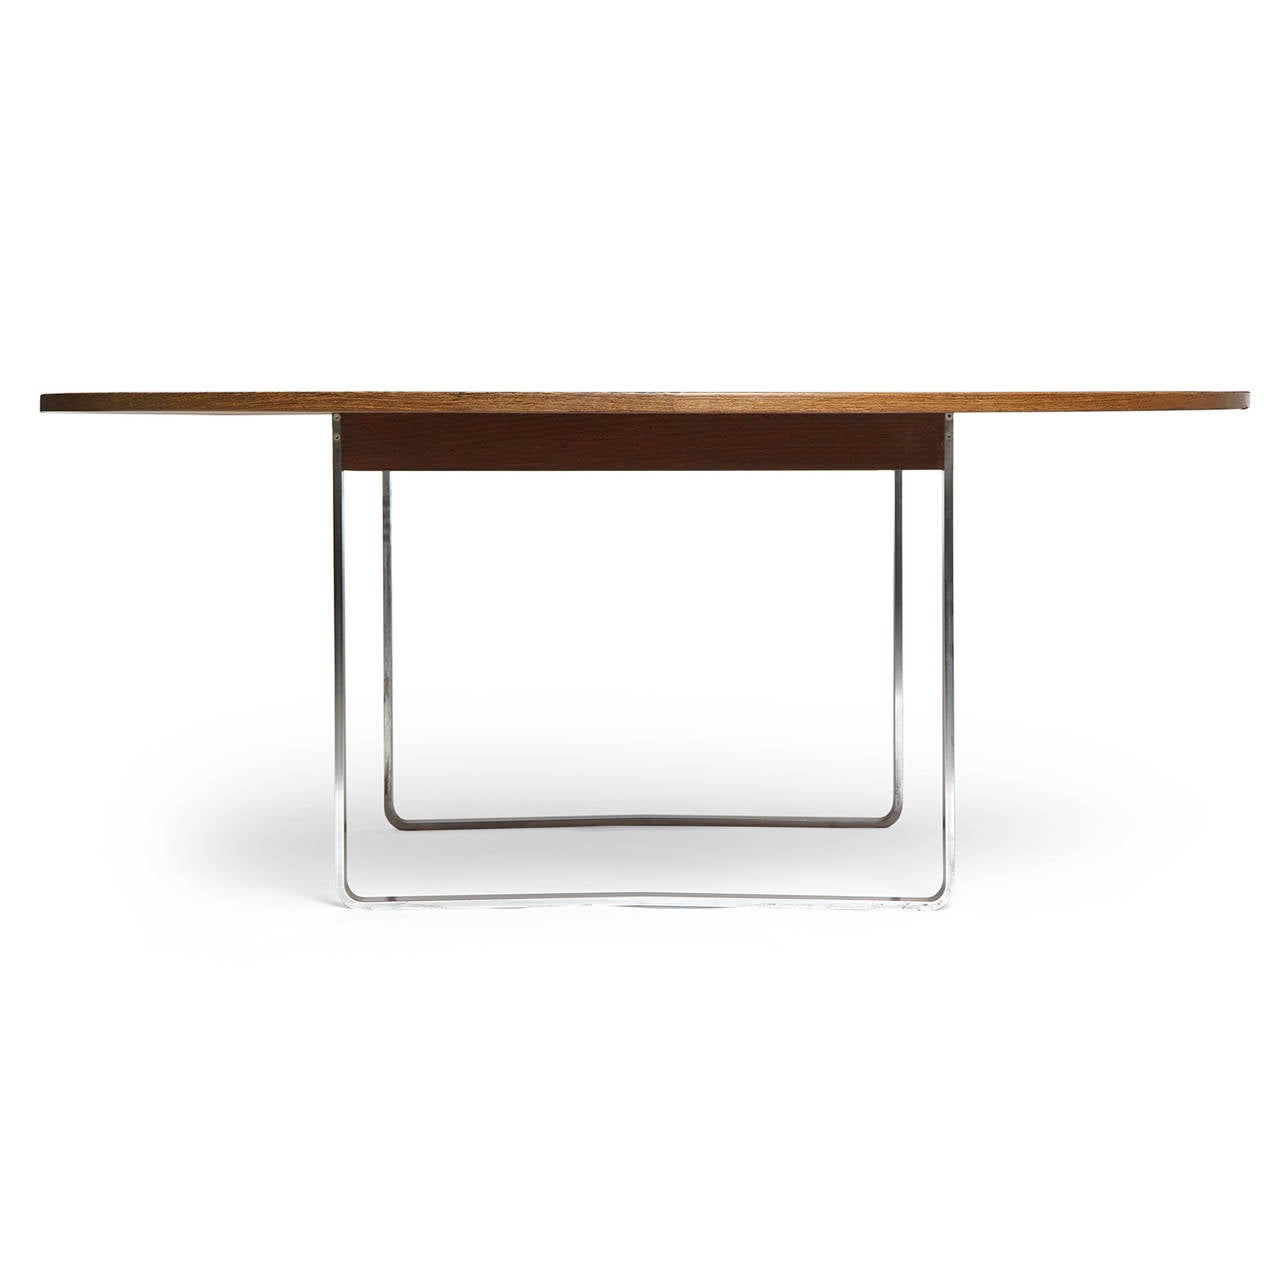 A rare, refined and superb dining or conference table having a circular top of vividly grained wenge floating on an architectural base crafted of continuously looped bands of satin brushed steel.